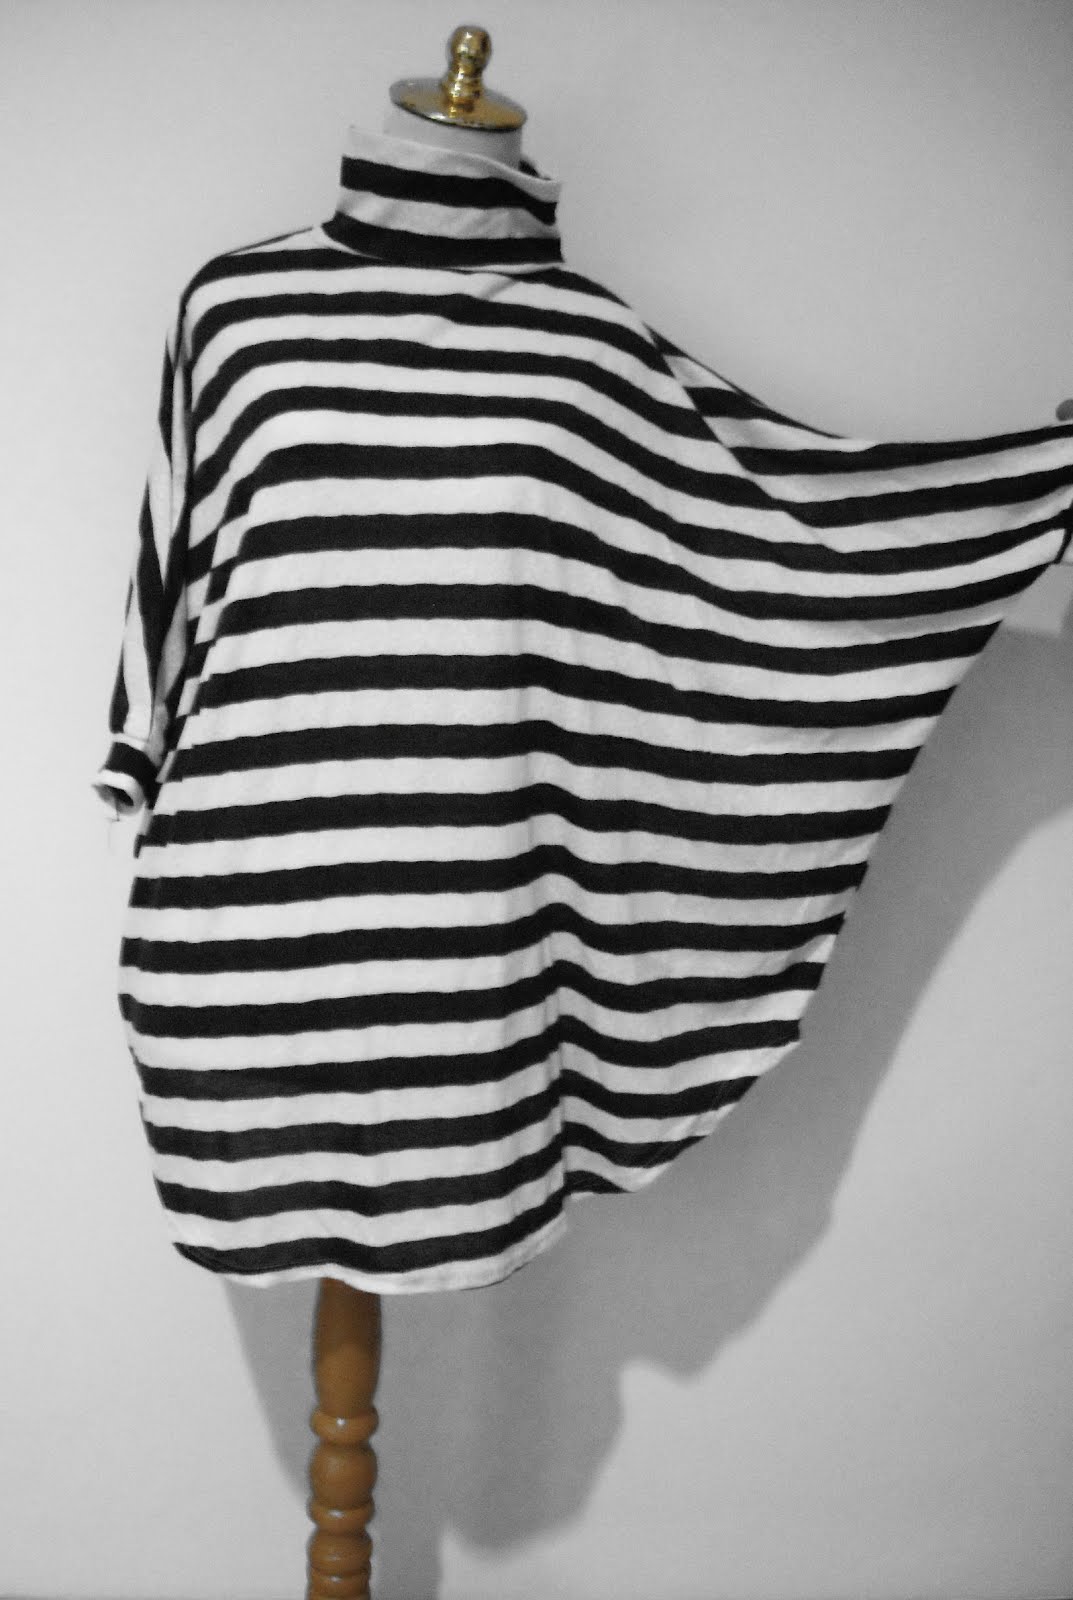 Veilicious!: Stripe Batwing with Turtle Neck